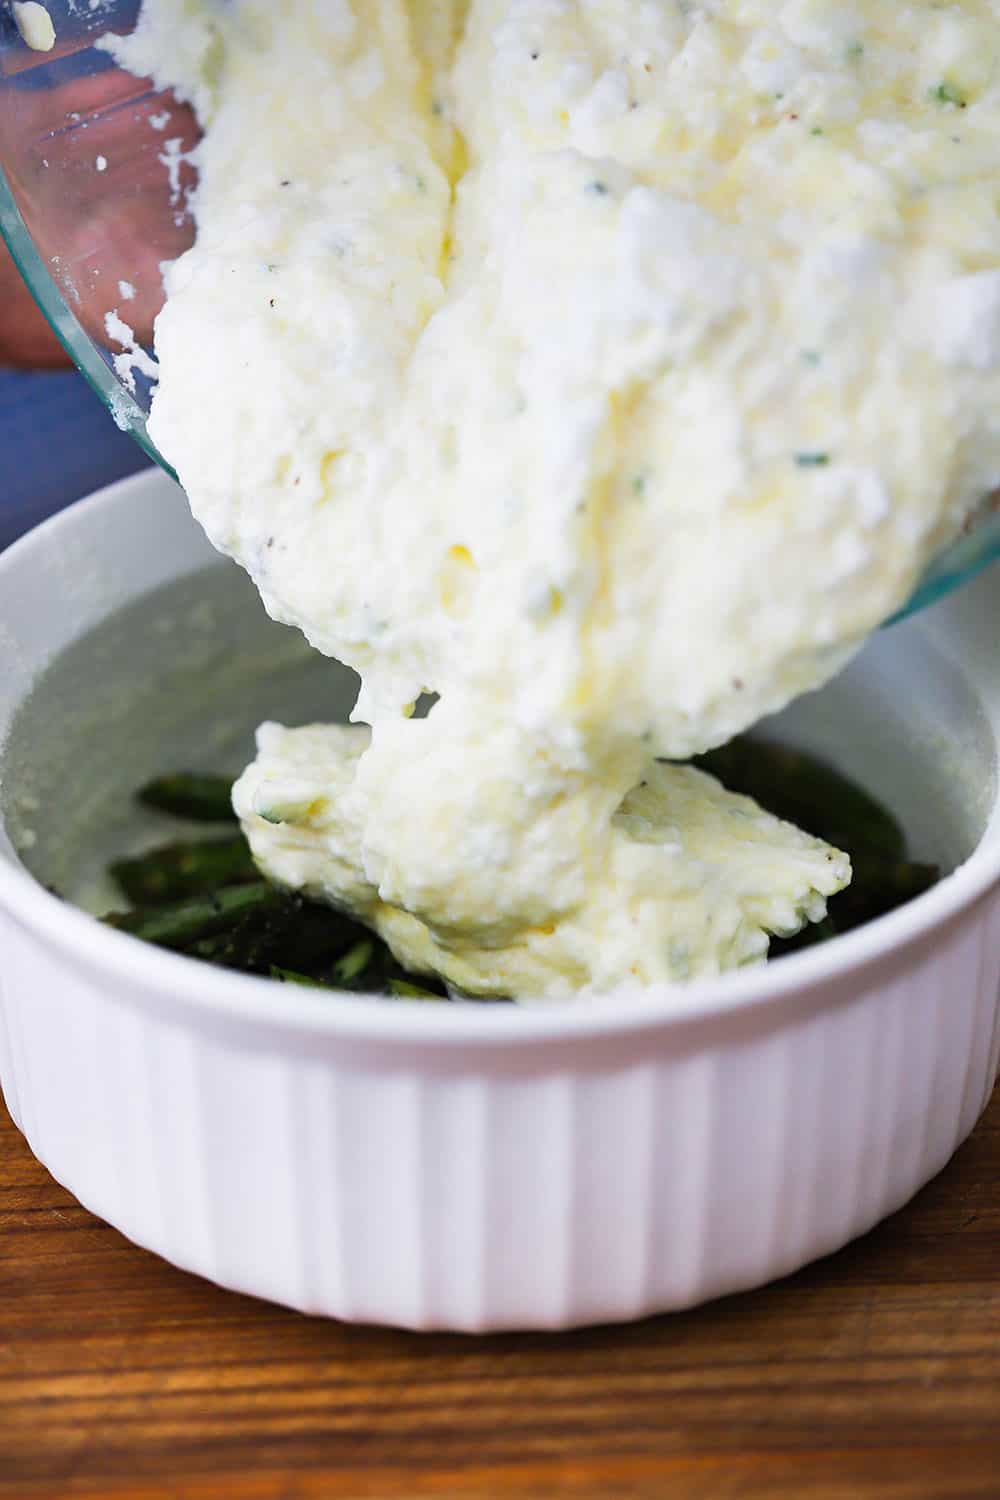 An uncooked souffle mixture being dropped into a white souffle bowl filled with roasted asparagus.